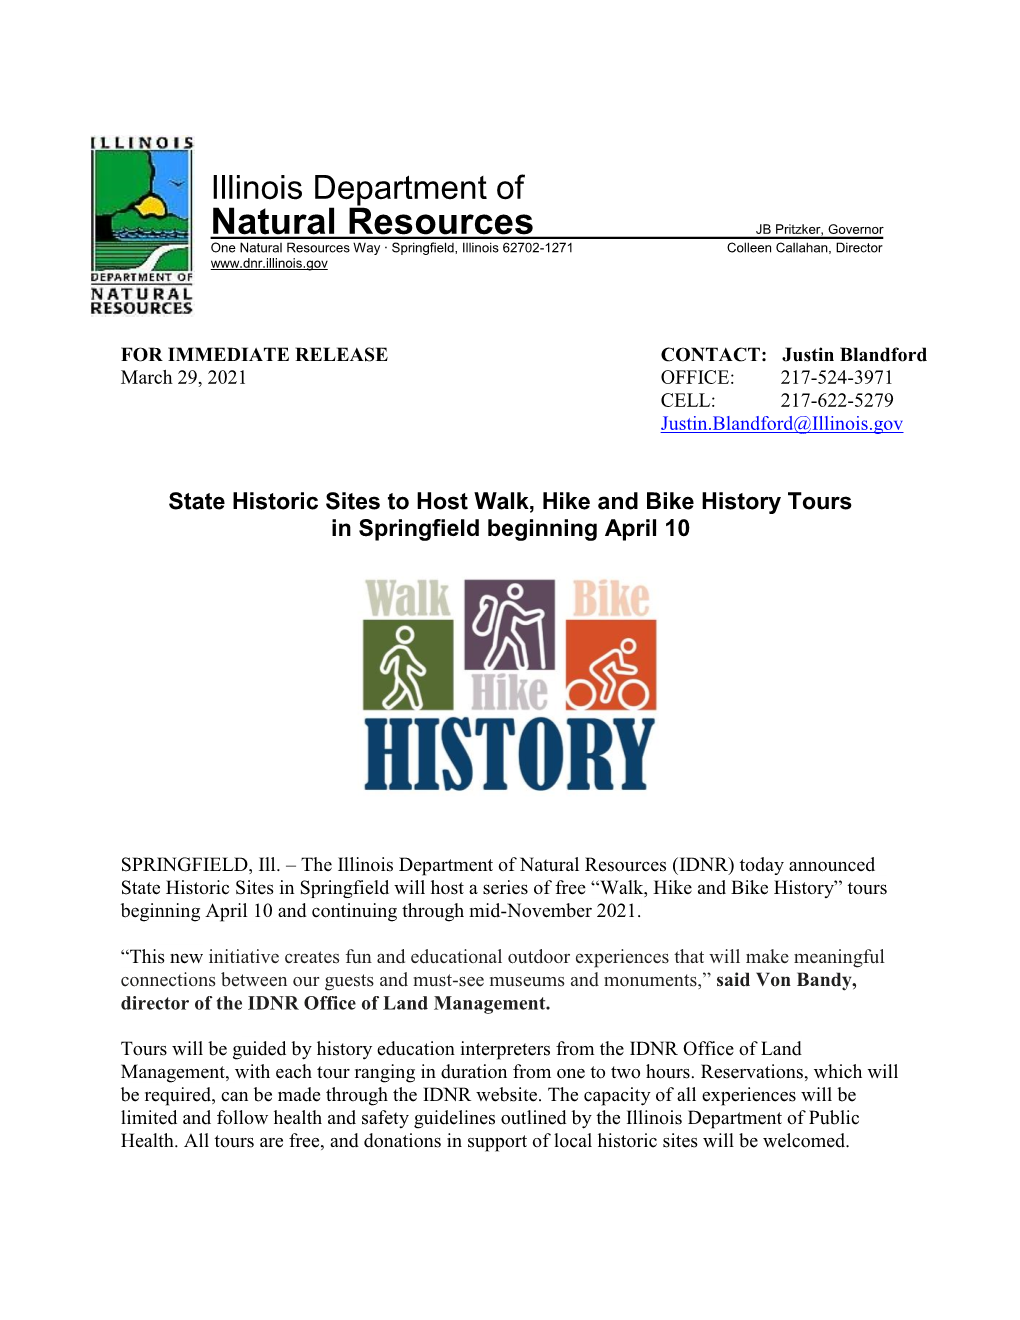 State Historic Sites to Host Walk, Hike and Bike History Tours in Springfield Beginning April 10